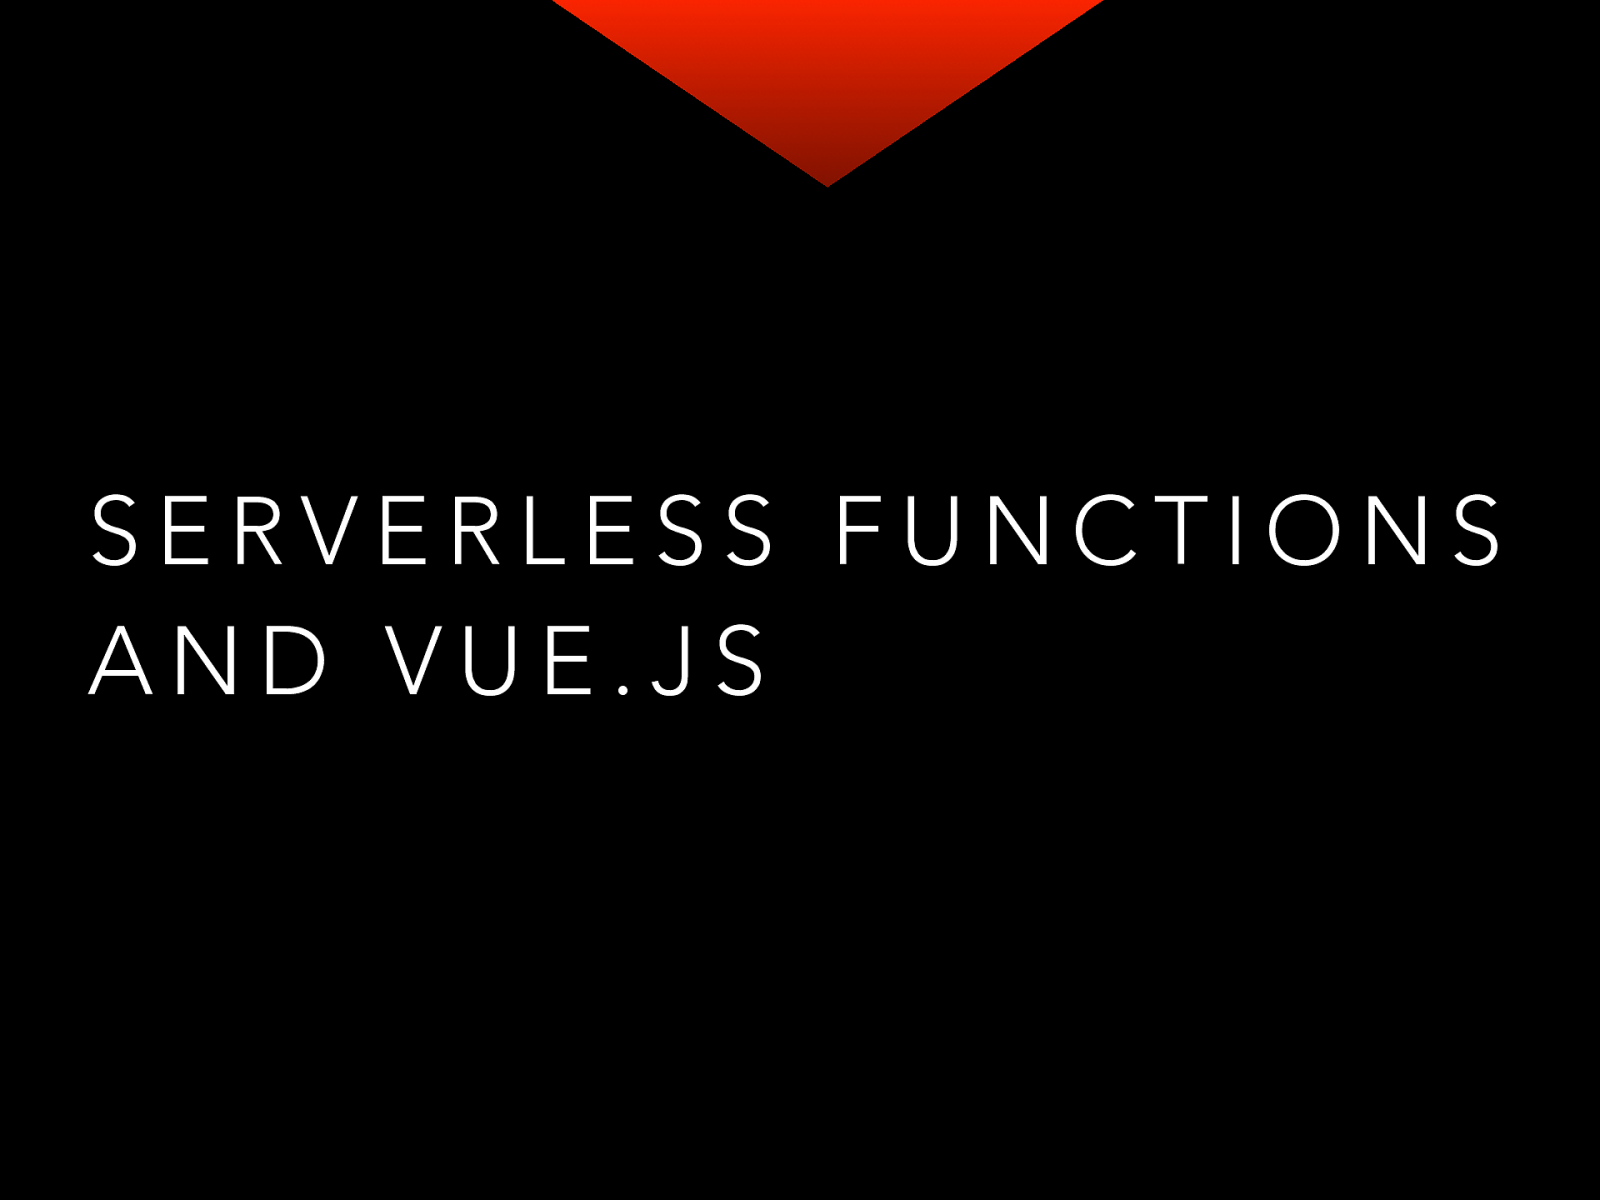 Serverless Functions and Vue.js